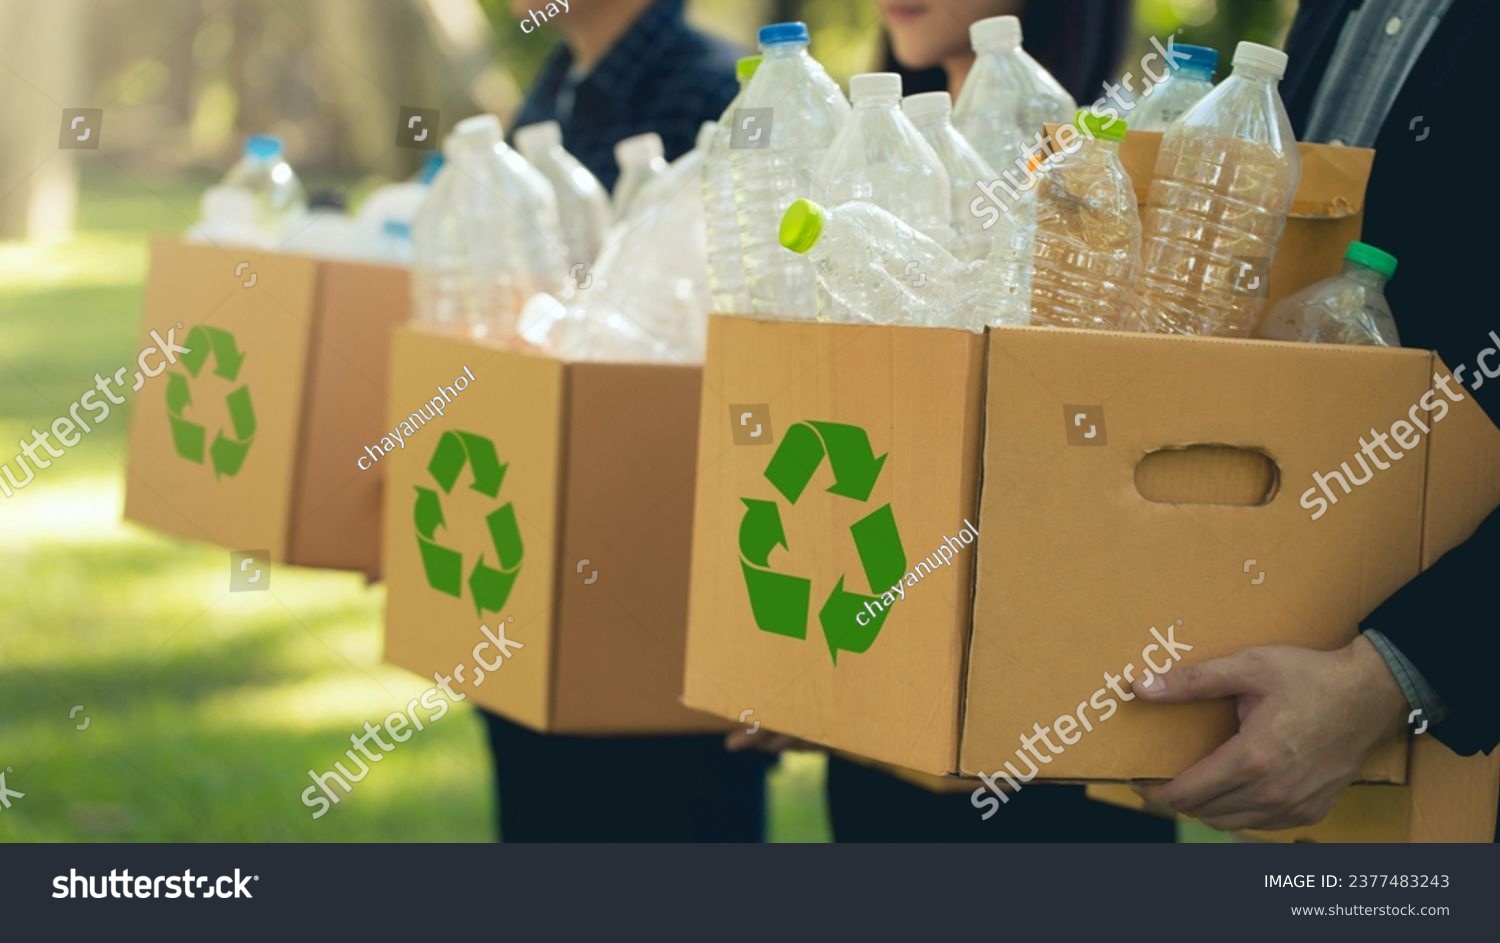 CSR  corporate social responsibility. Business people holding box garbage for recycling. Earth Day, Business teamwork to recycle for environmental sustainability. volunteer, Unity. team business. #2377483243